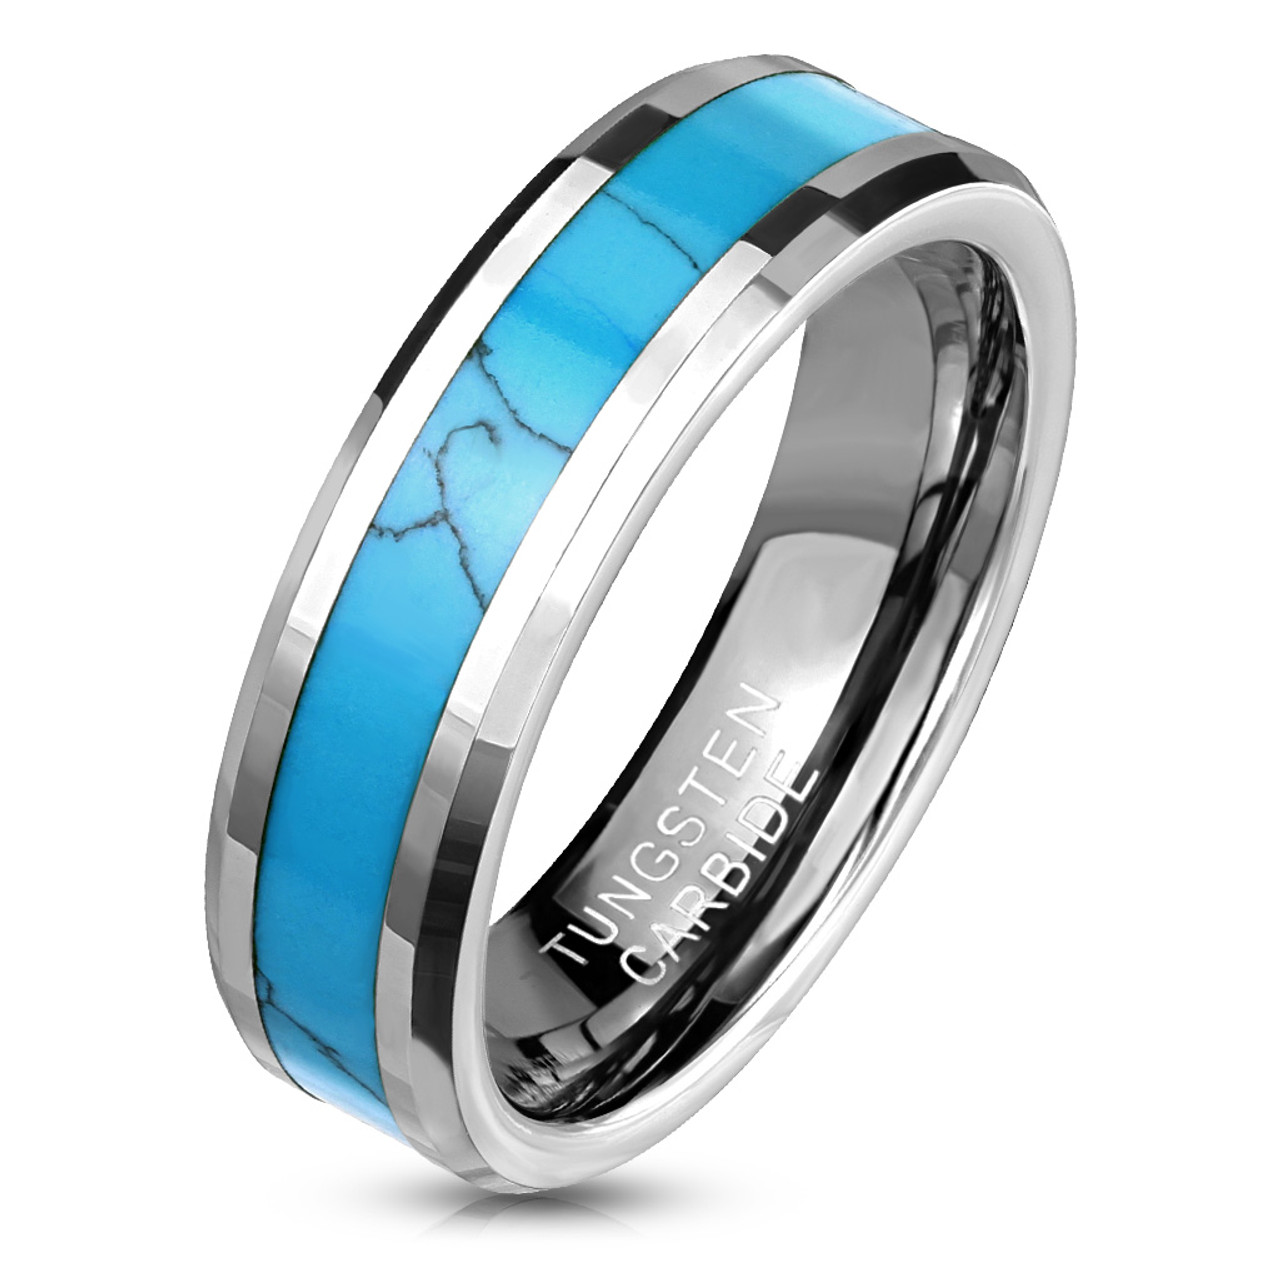 Unique Mens Ring Gold Plated Rosewood Inlay Wedding Ring Anniversary Ring Engrave Gold Tungsten Crushed Turquoise Wood Inlay Wedding Band